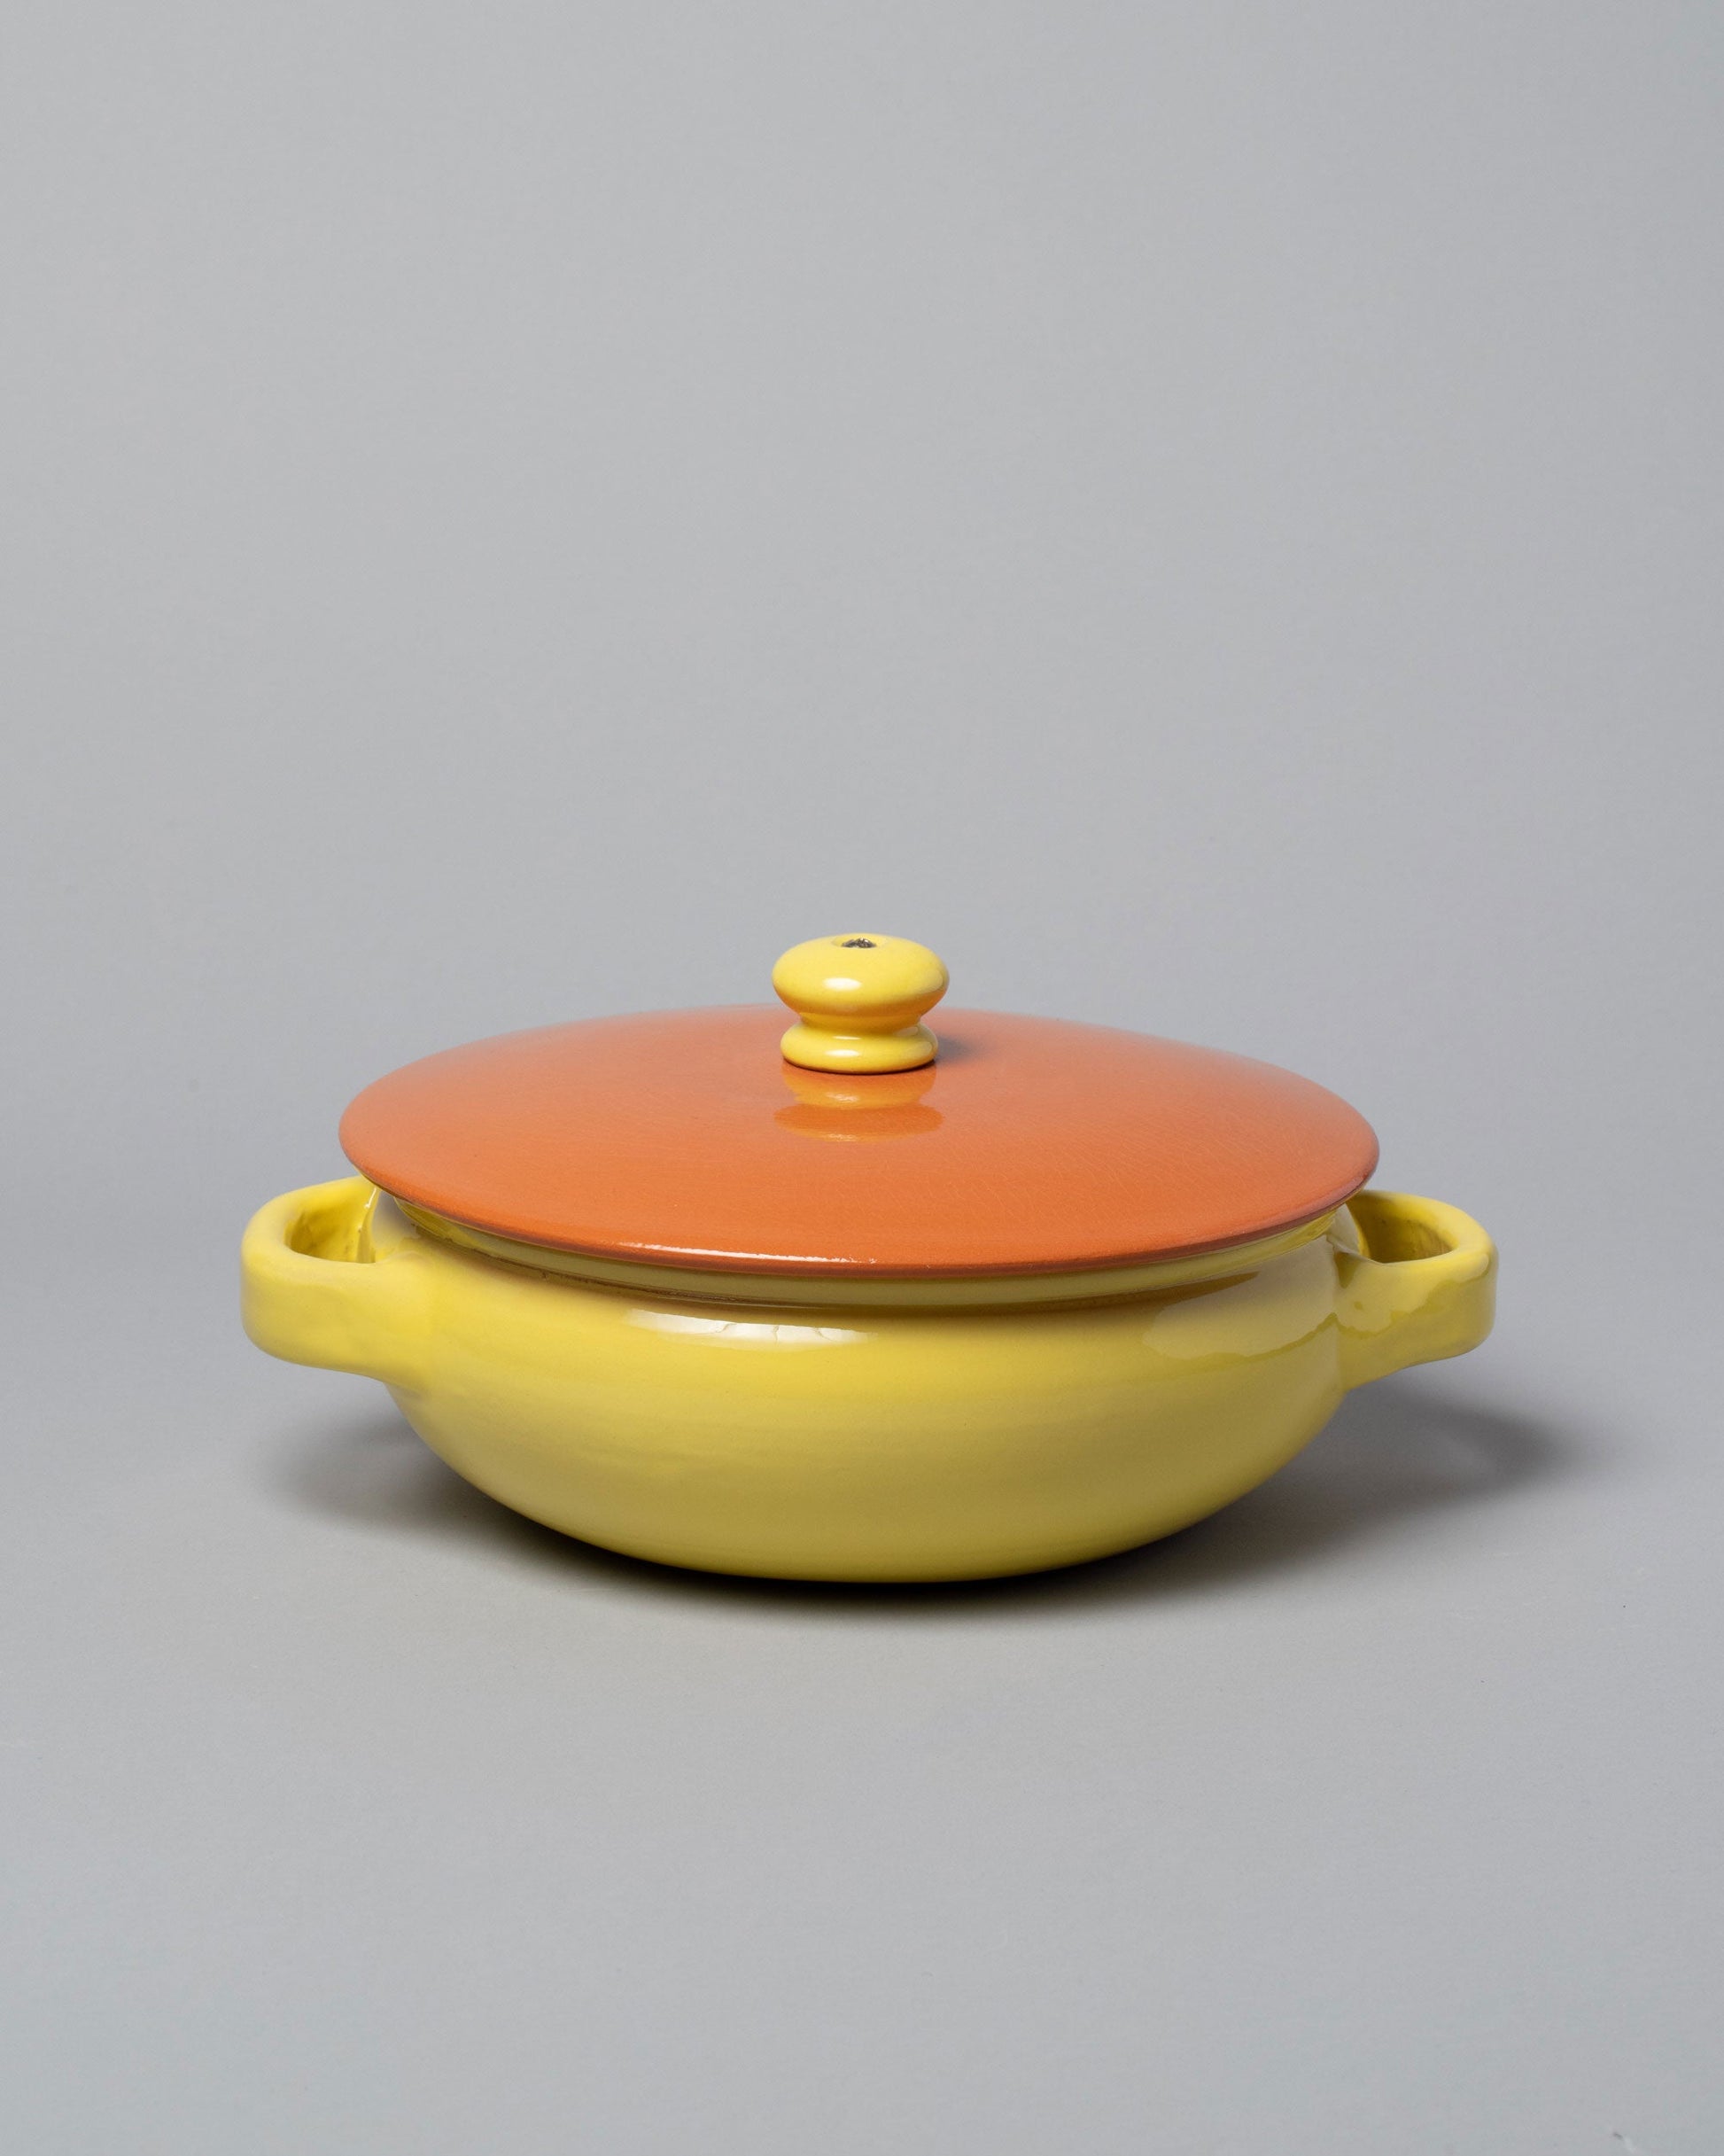  Mazzotti 1903 Small Yellow and Orange Clay Pot on light color background.